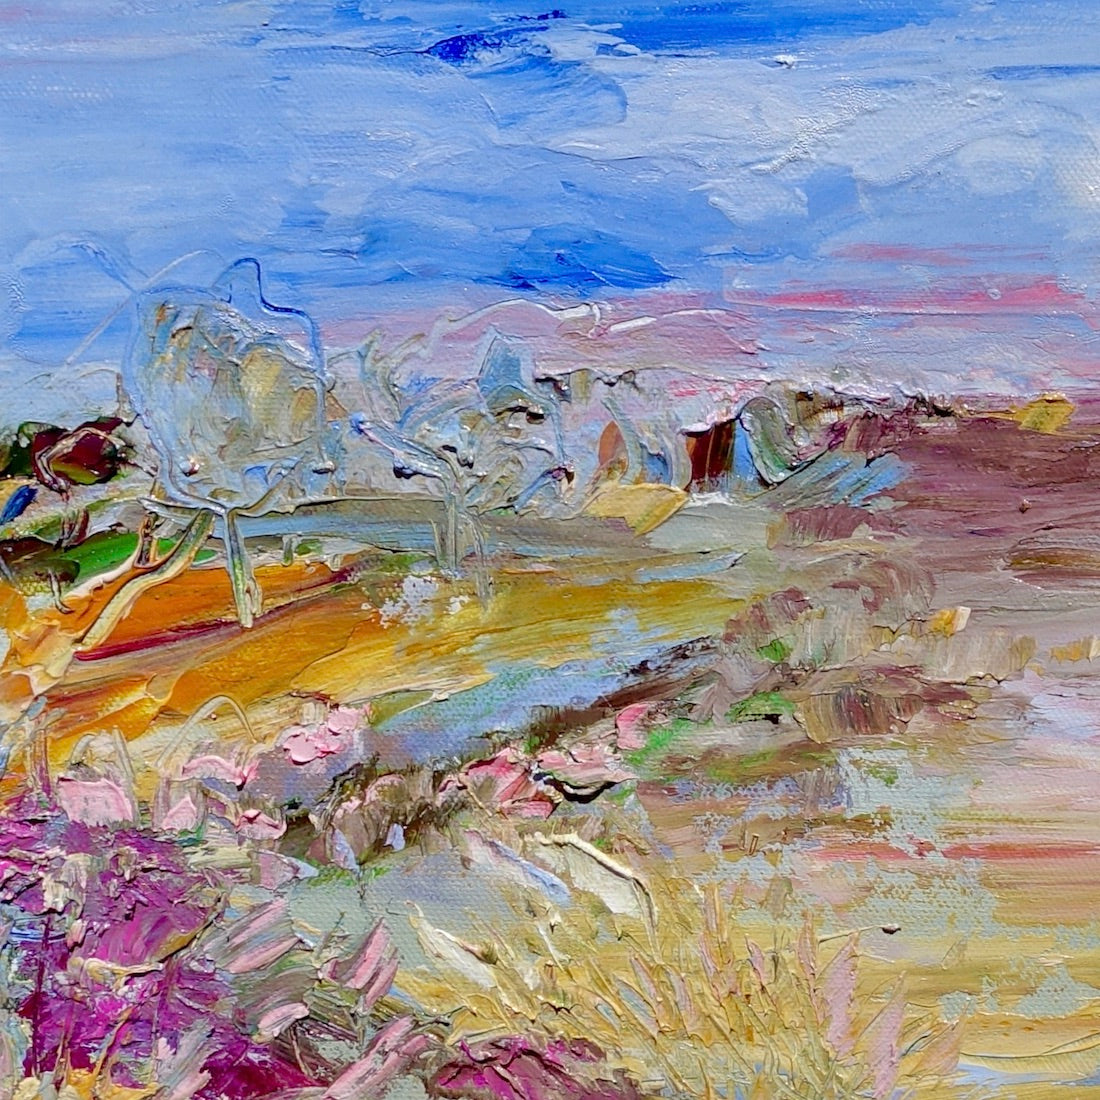 Abstract painting of a field in shades of pink, orange and yellow against a blue sky. Square view.